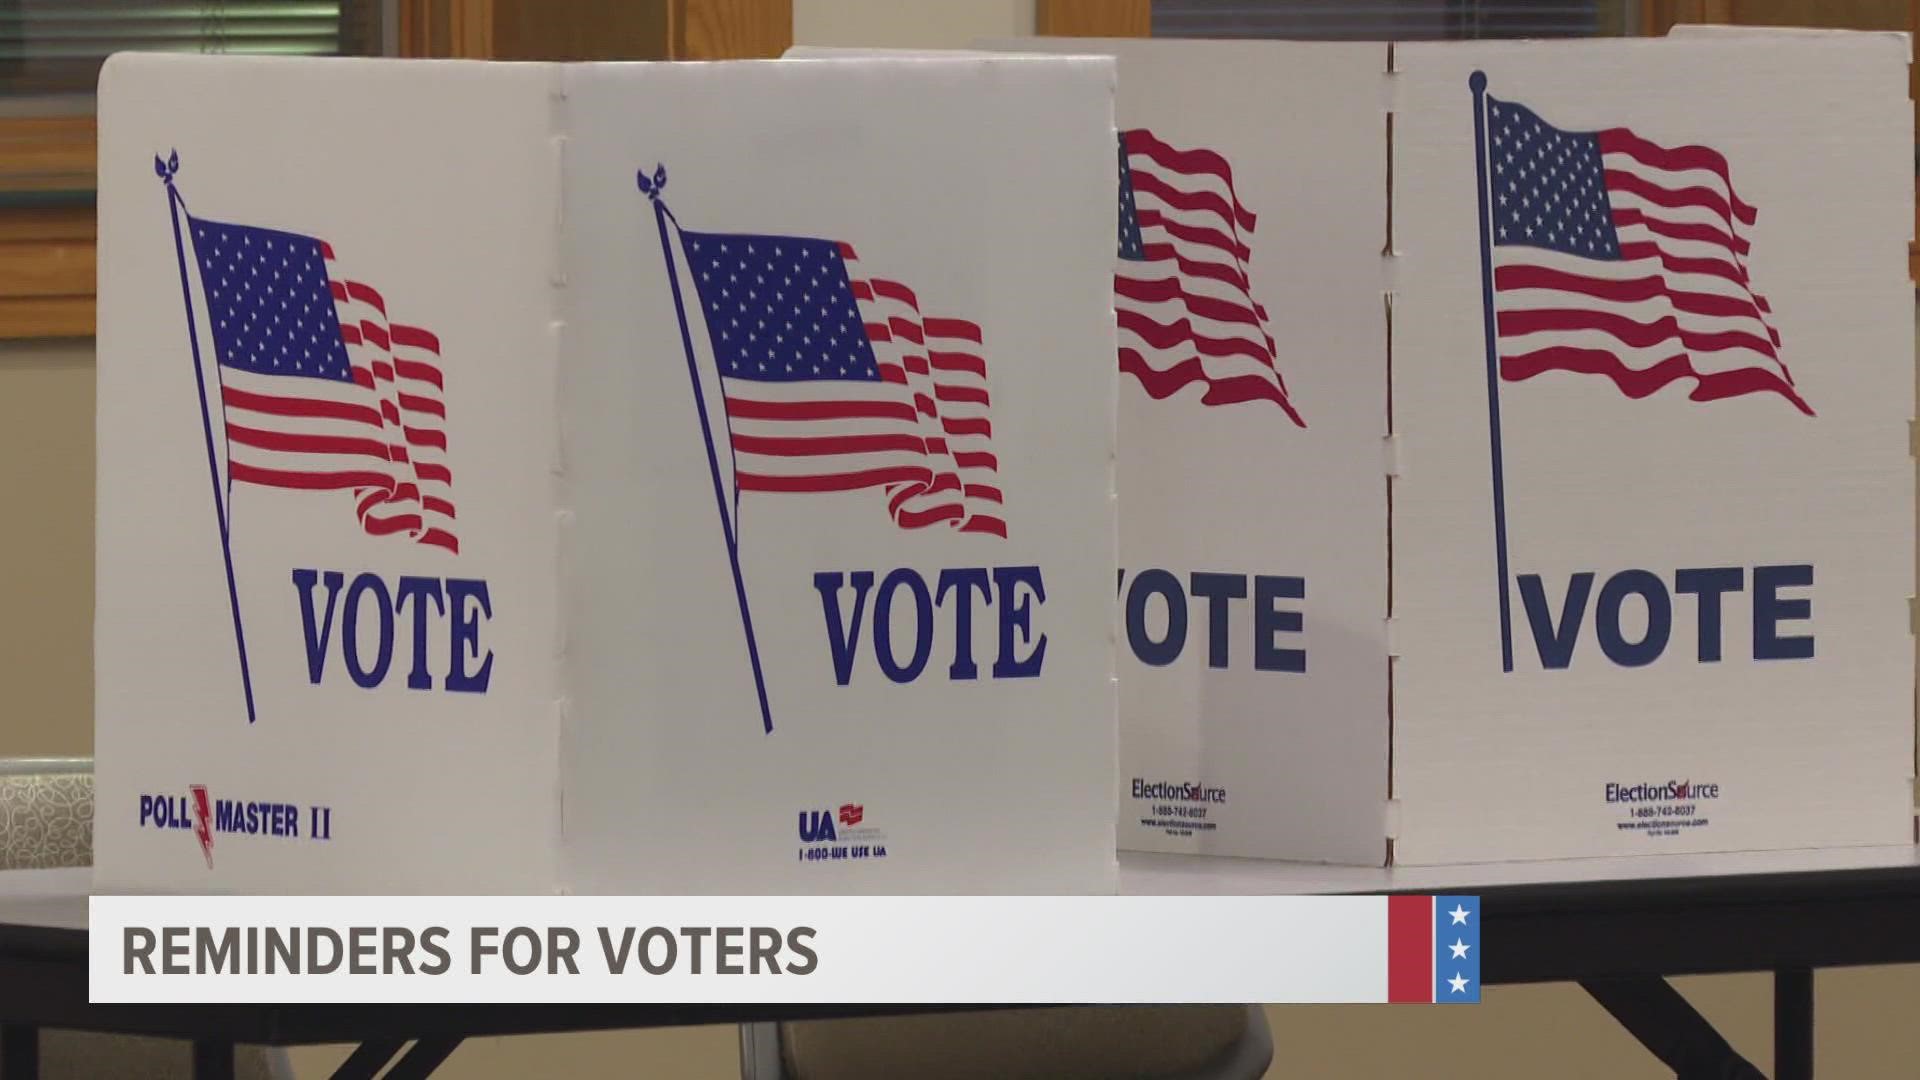 Some areas of West Michigan are experiencing a high voter turnout, both in absentee ballots and in-person voters.